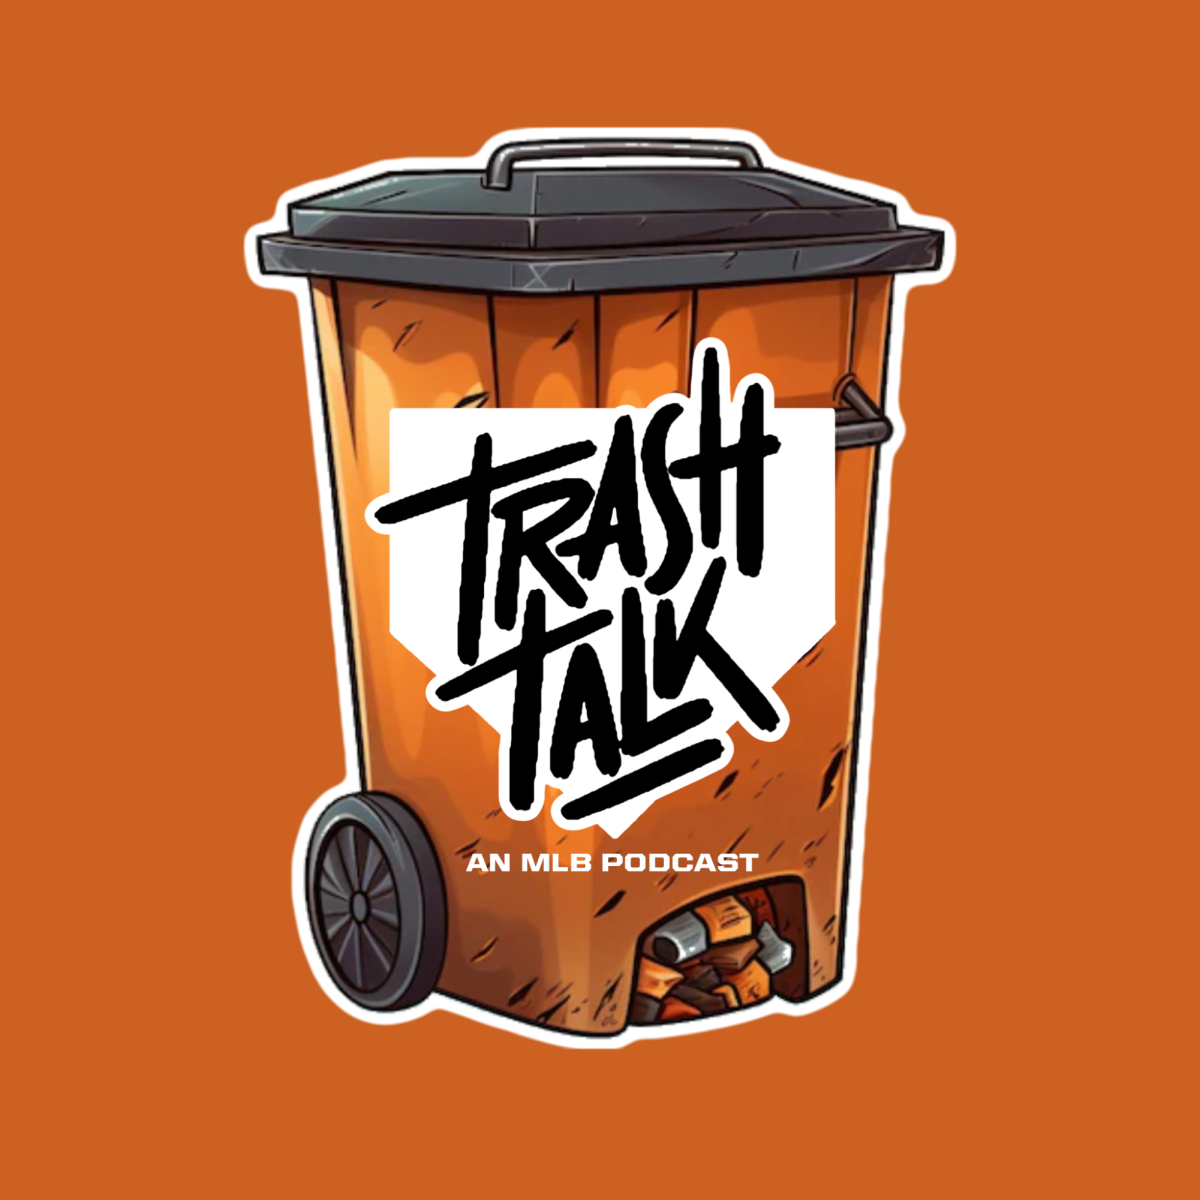 The Trash Talk a podcast about baseball official logo. 